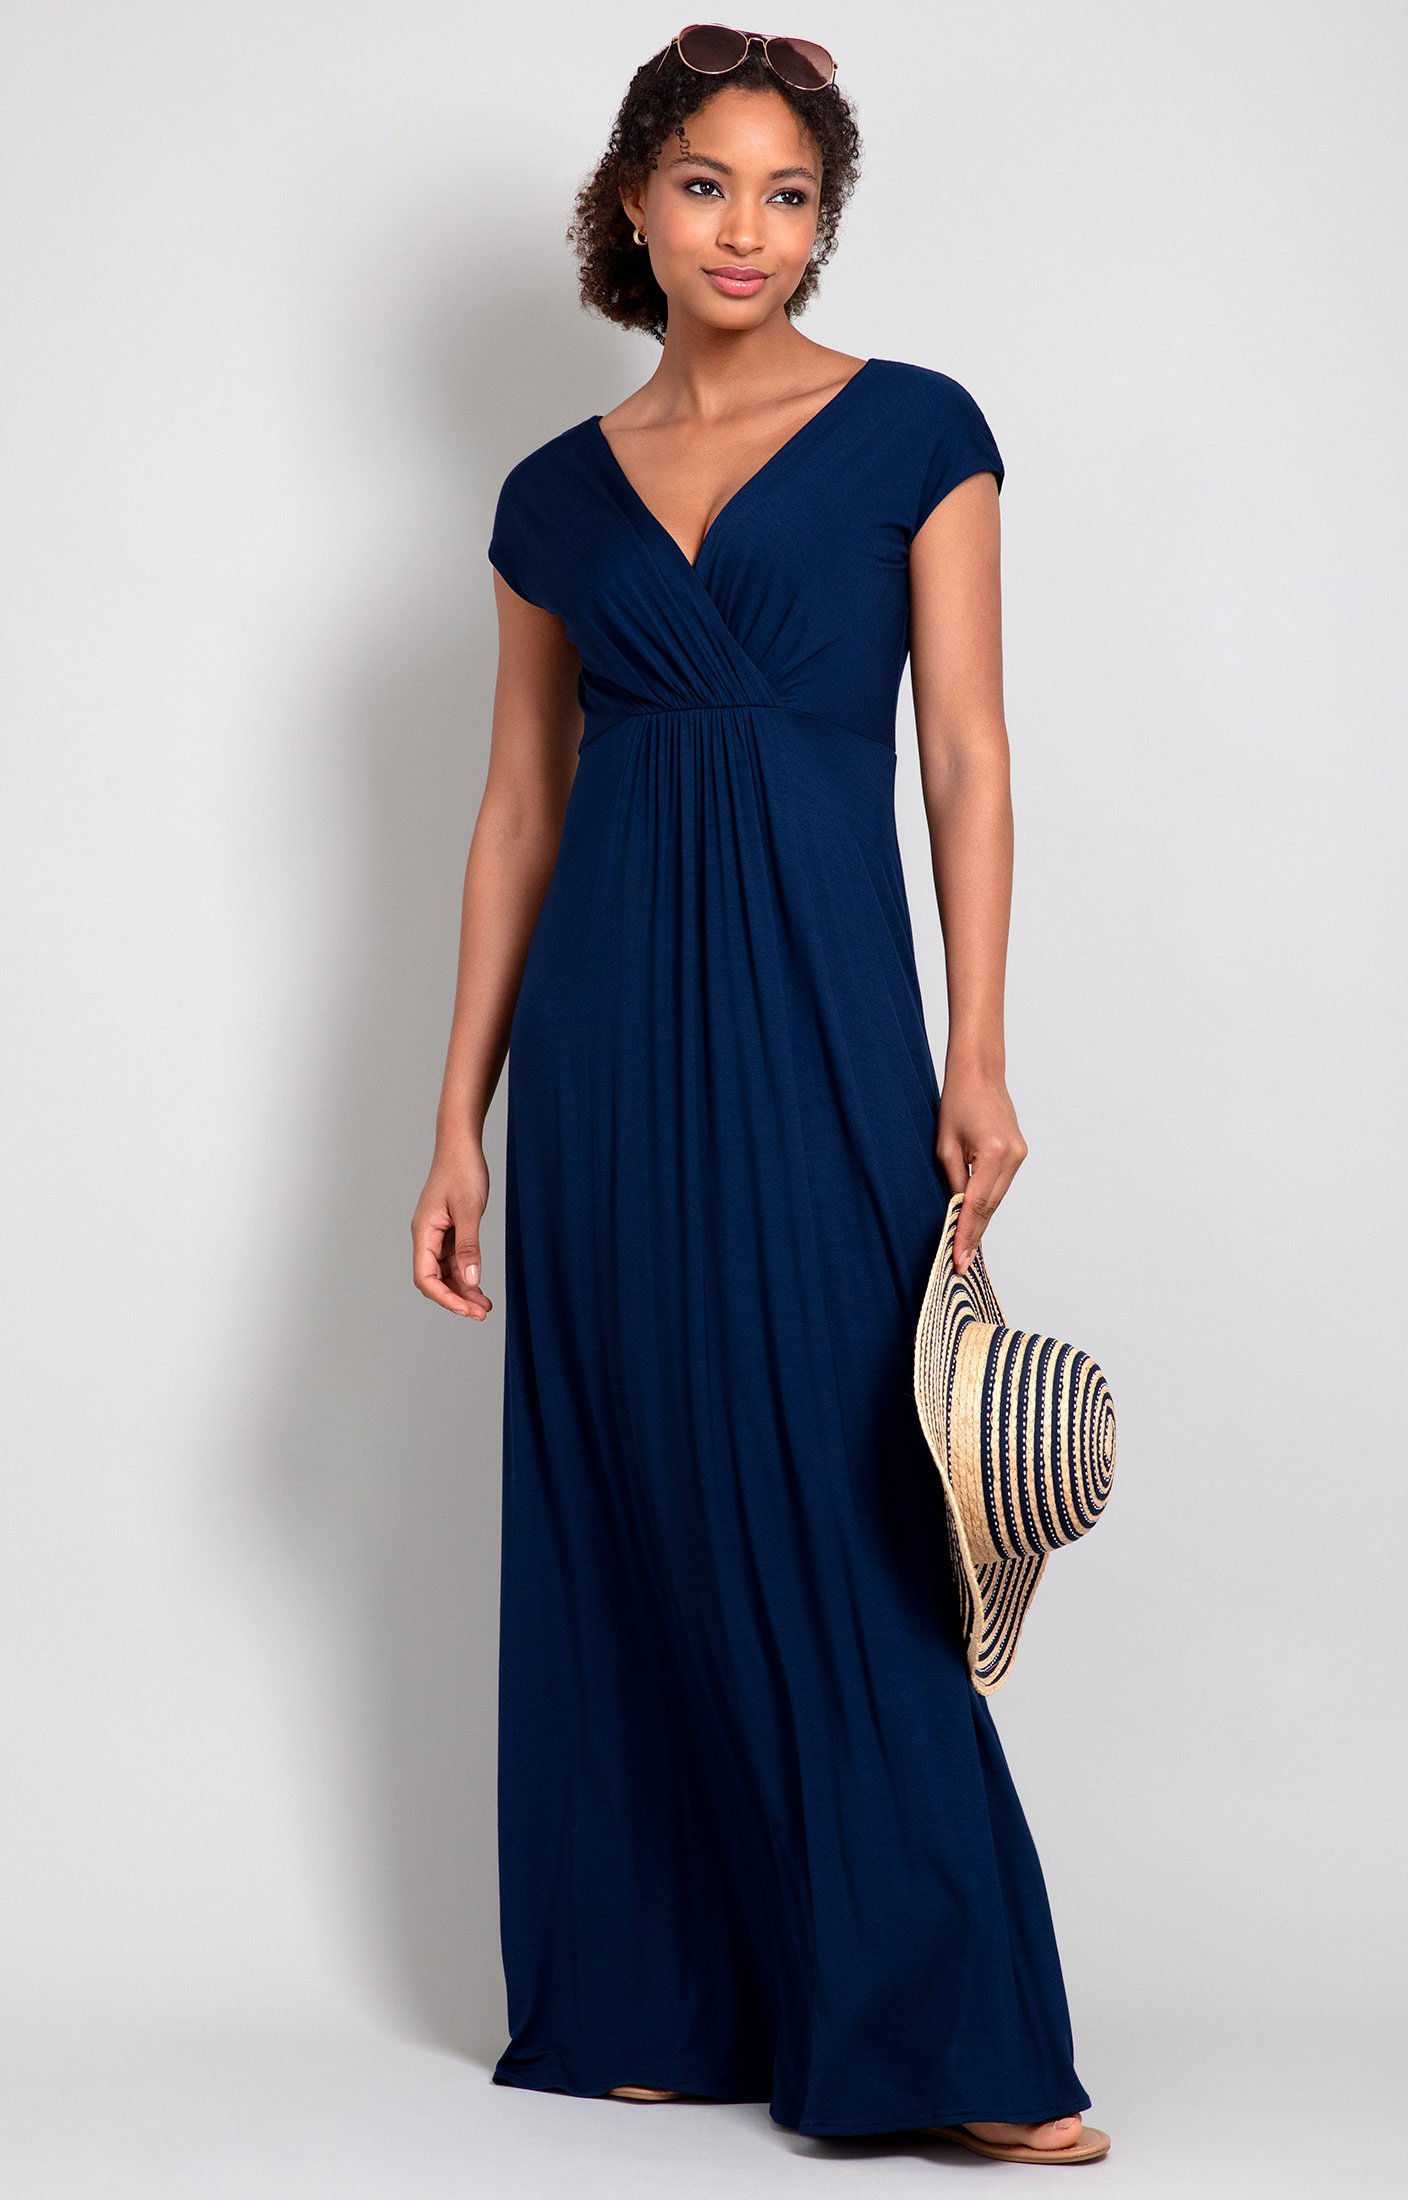 by Wear - Party Blue Maxi Clothes Navy Wedding Sophia Dresses, Evening Alie and Dress